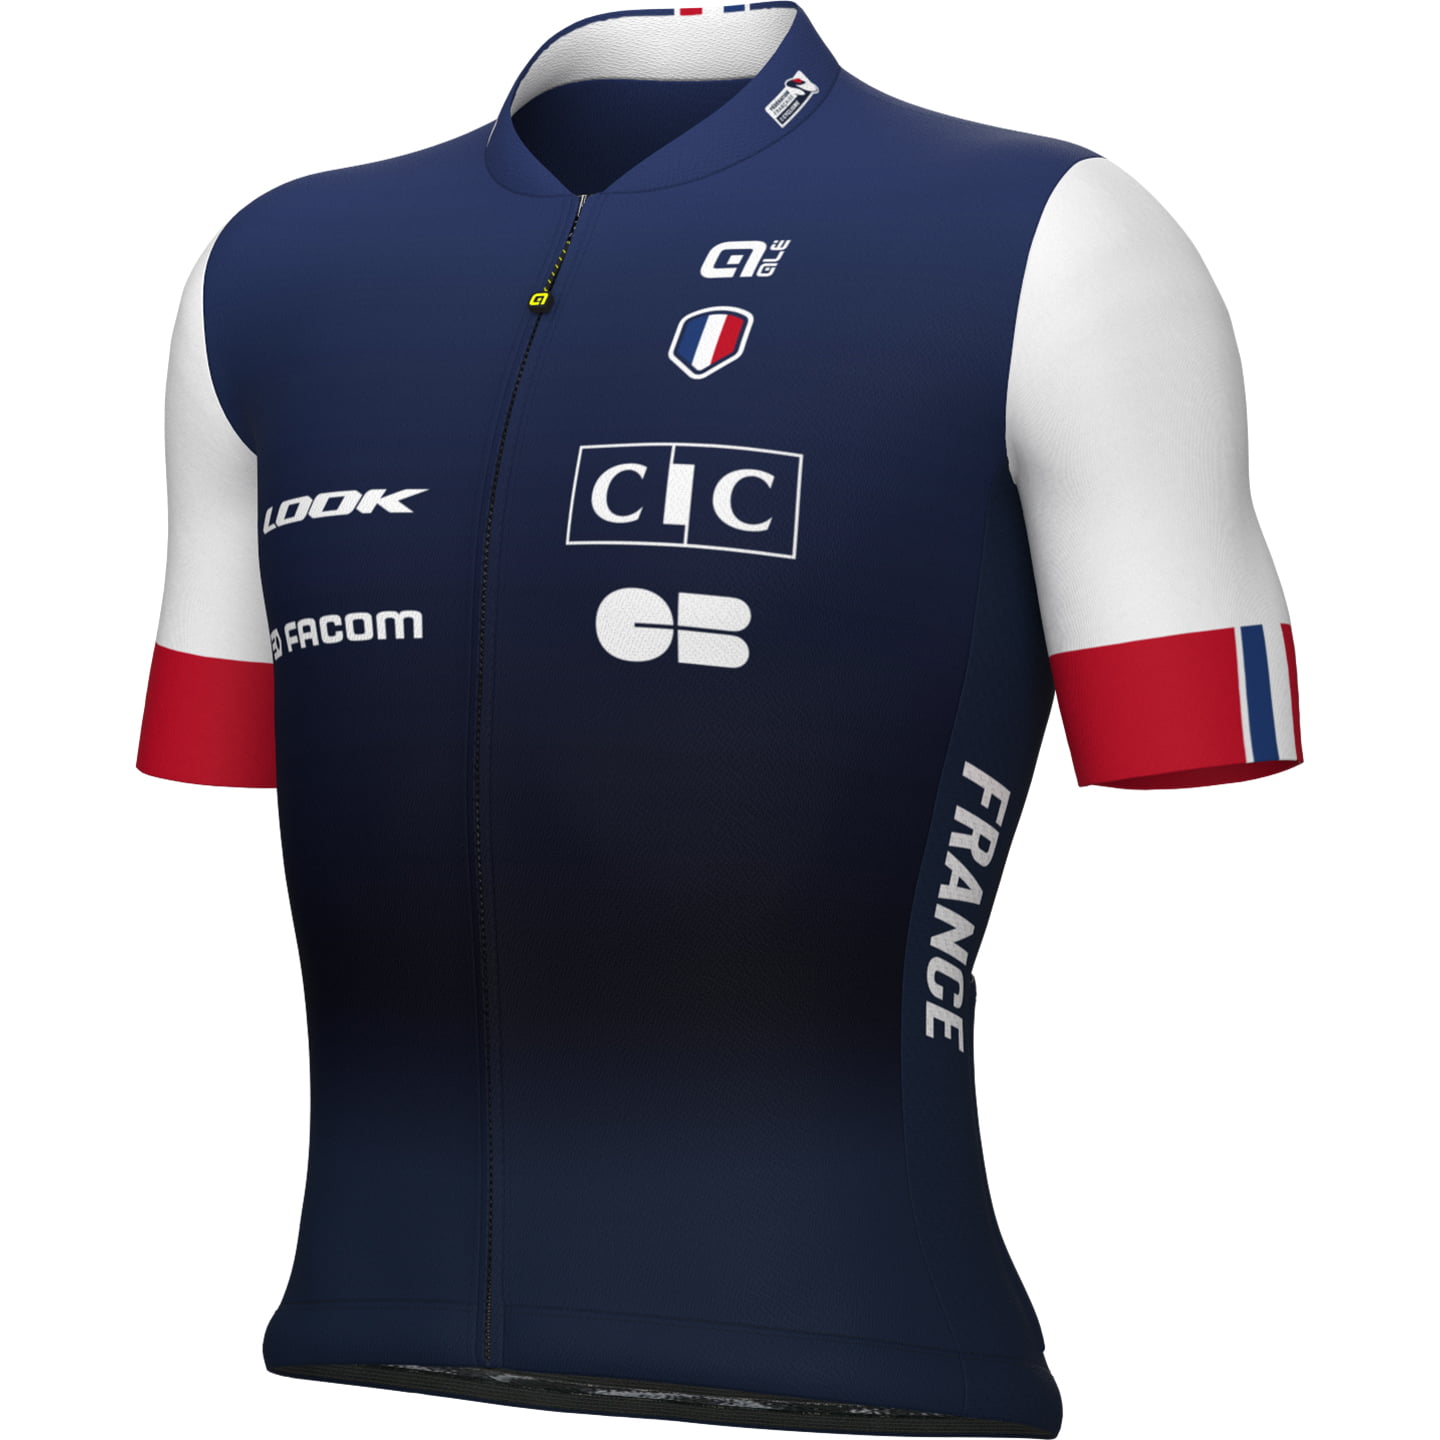 FRENCH NATIONAL TEAM 2024 Short Sleeve Jersey, for men, size 2XL, Cycle shirt, Bike gear